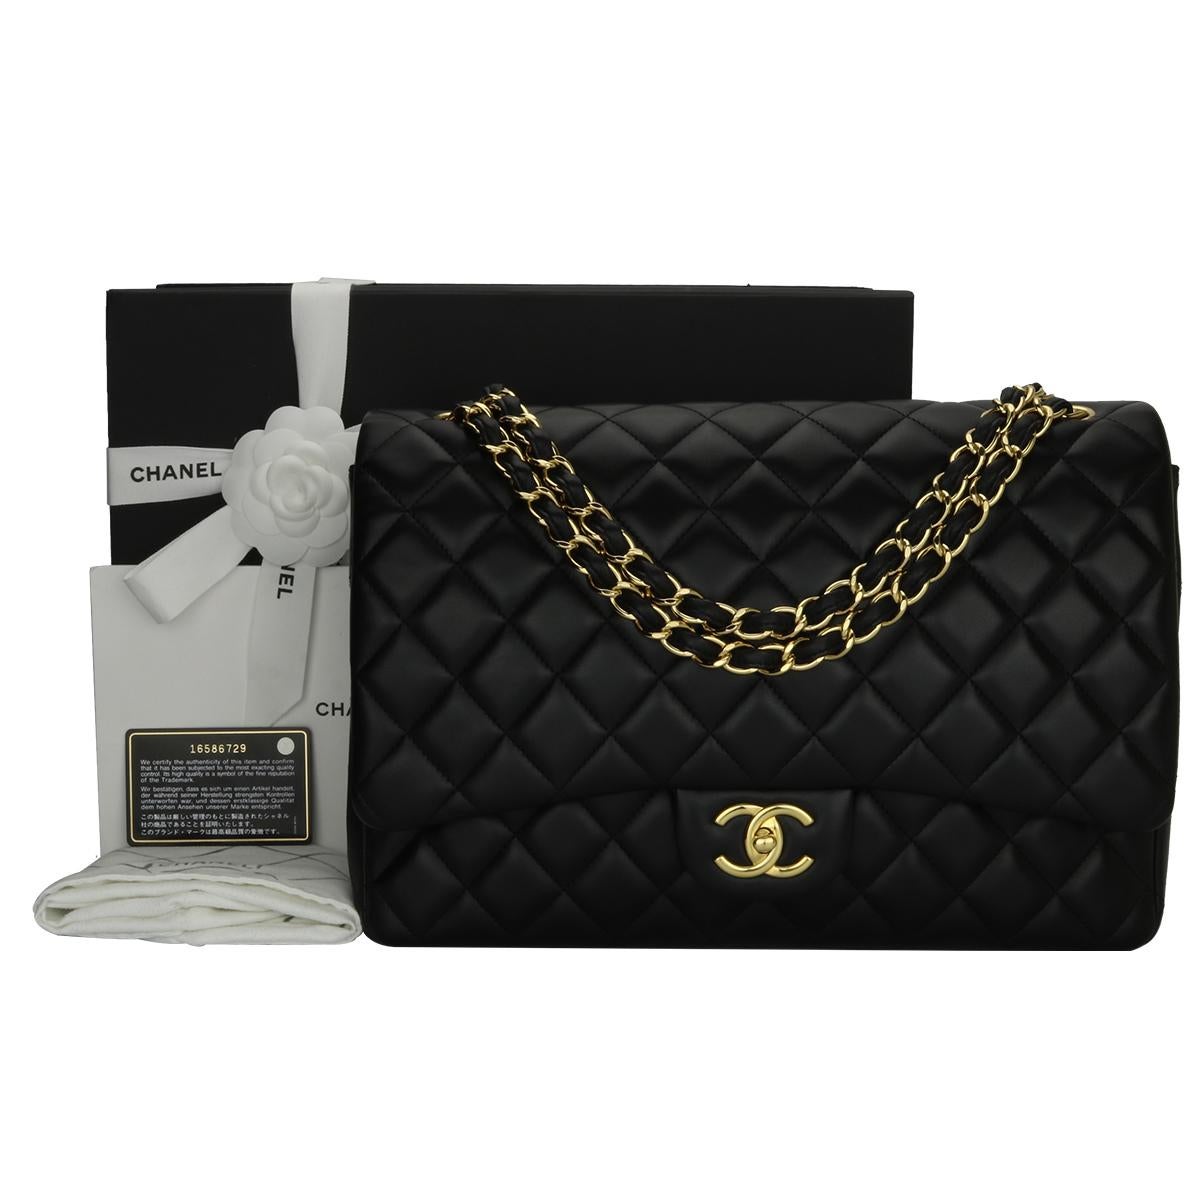 Authentic CHANEL Black Lambskin Maxi Double Flap with Gold Hardware 2012.

This stunning bag is in a pristine condition, the bag still holds its original shape and the hardware is still very shiny. Leather still smells fresh as if new.

Exterior